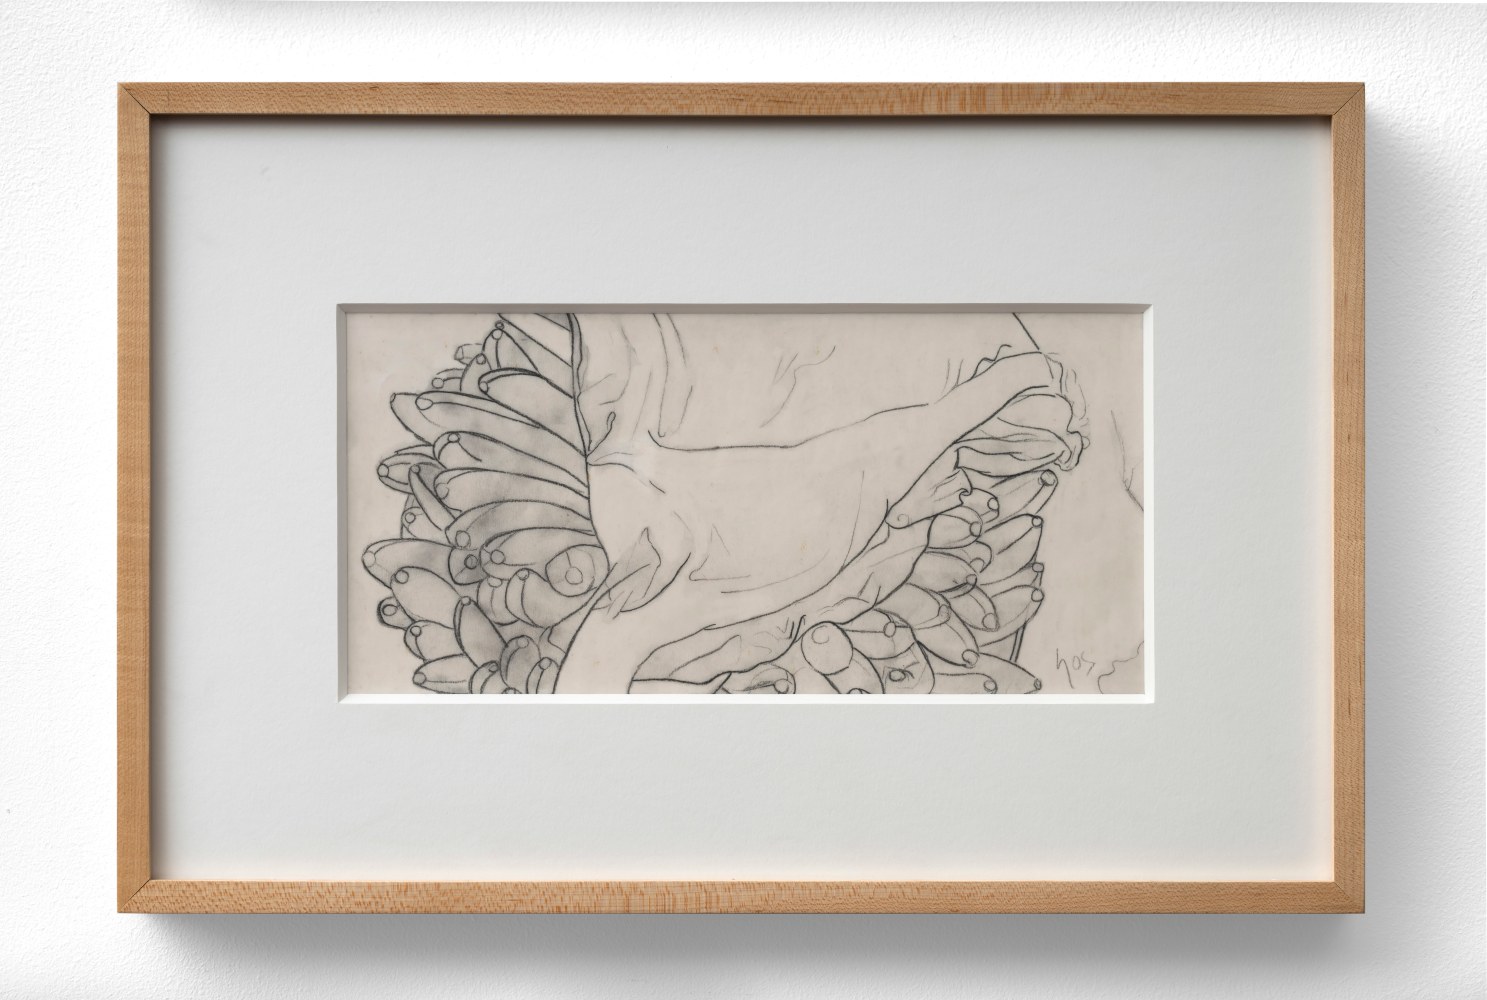 Ana Mercedes Hoyos (1942-2014) Still Life III, 1996 pencil on paper 5 3/4 x 12 inches; 14.6 x 30.5 centimeters LSFA# 01495